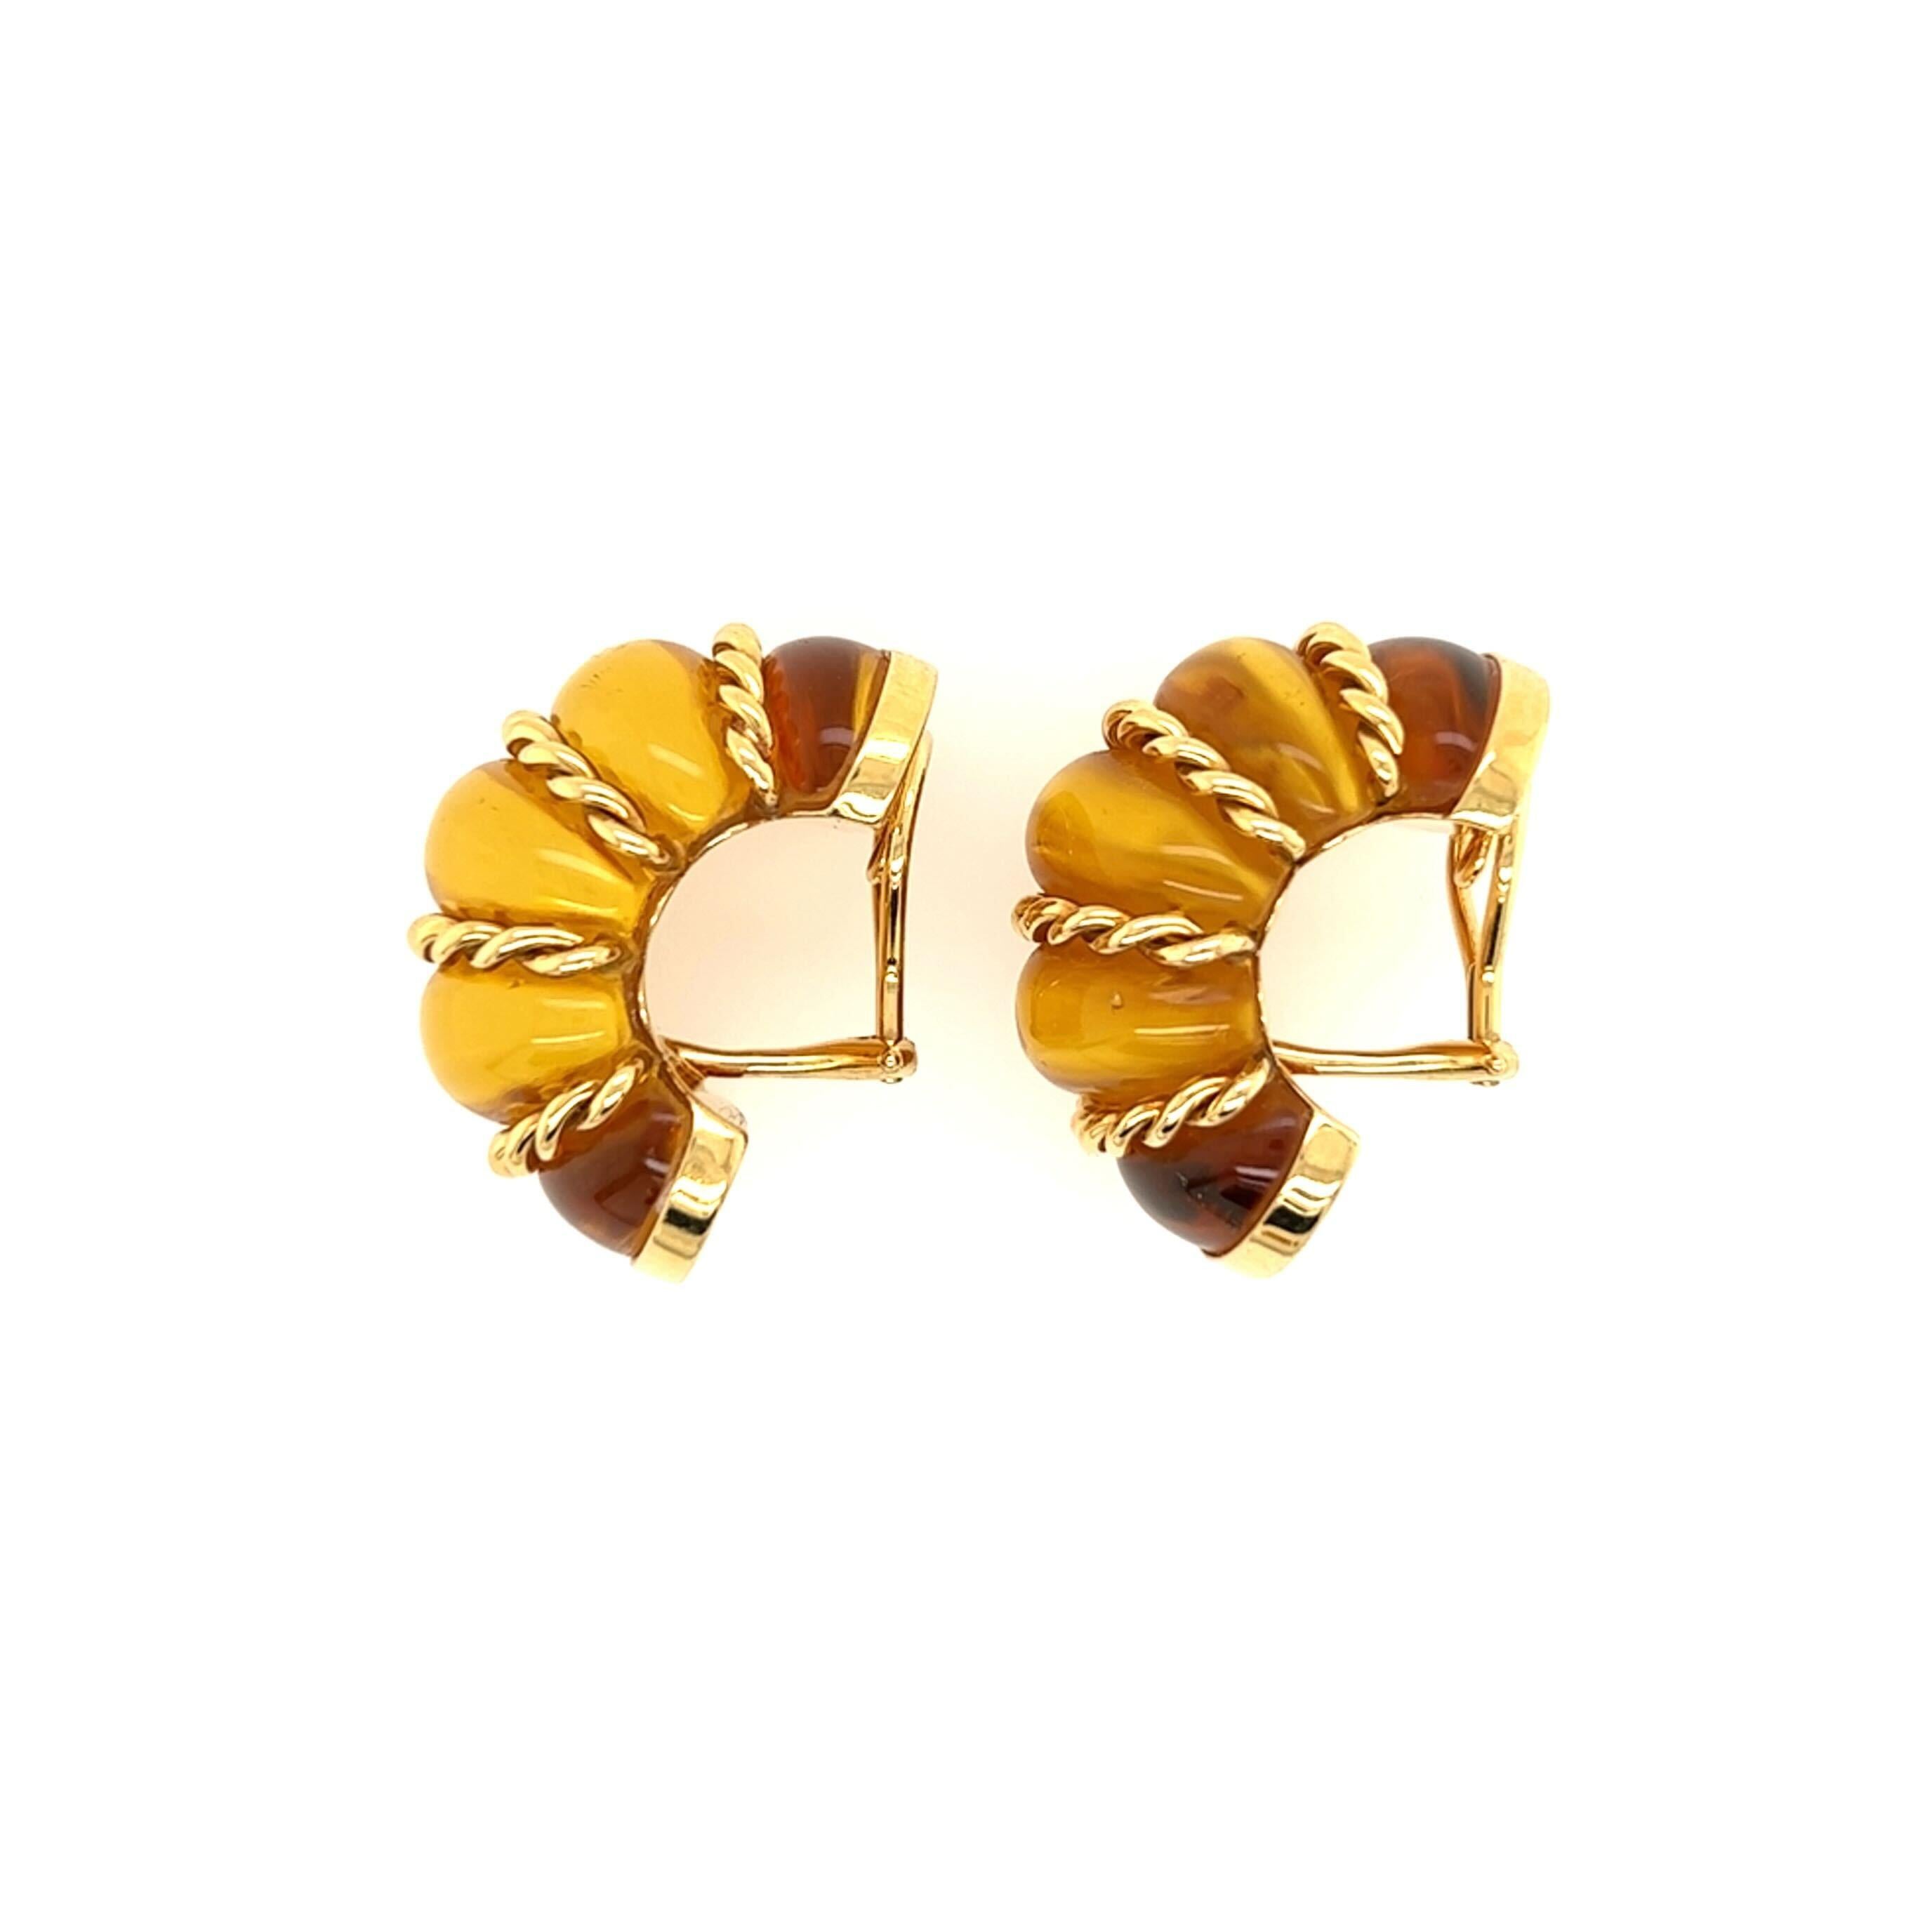 A pair of 18 karat yellow gold and amber earclips, Seaman Schepps.  The “Shrimp” earclips formed of scalloped amber half hoops horizontally striped with ropework gold.  Length approximately 1 1/4 inches.  Gross weight approximately 28.50 grams. 